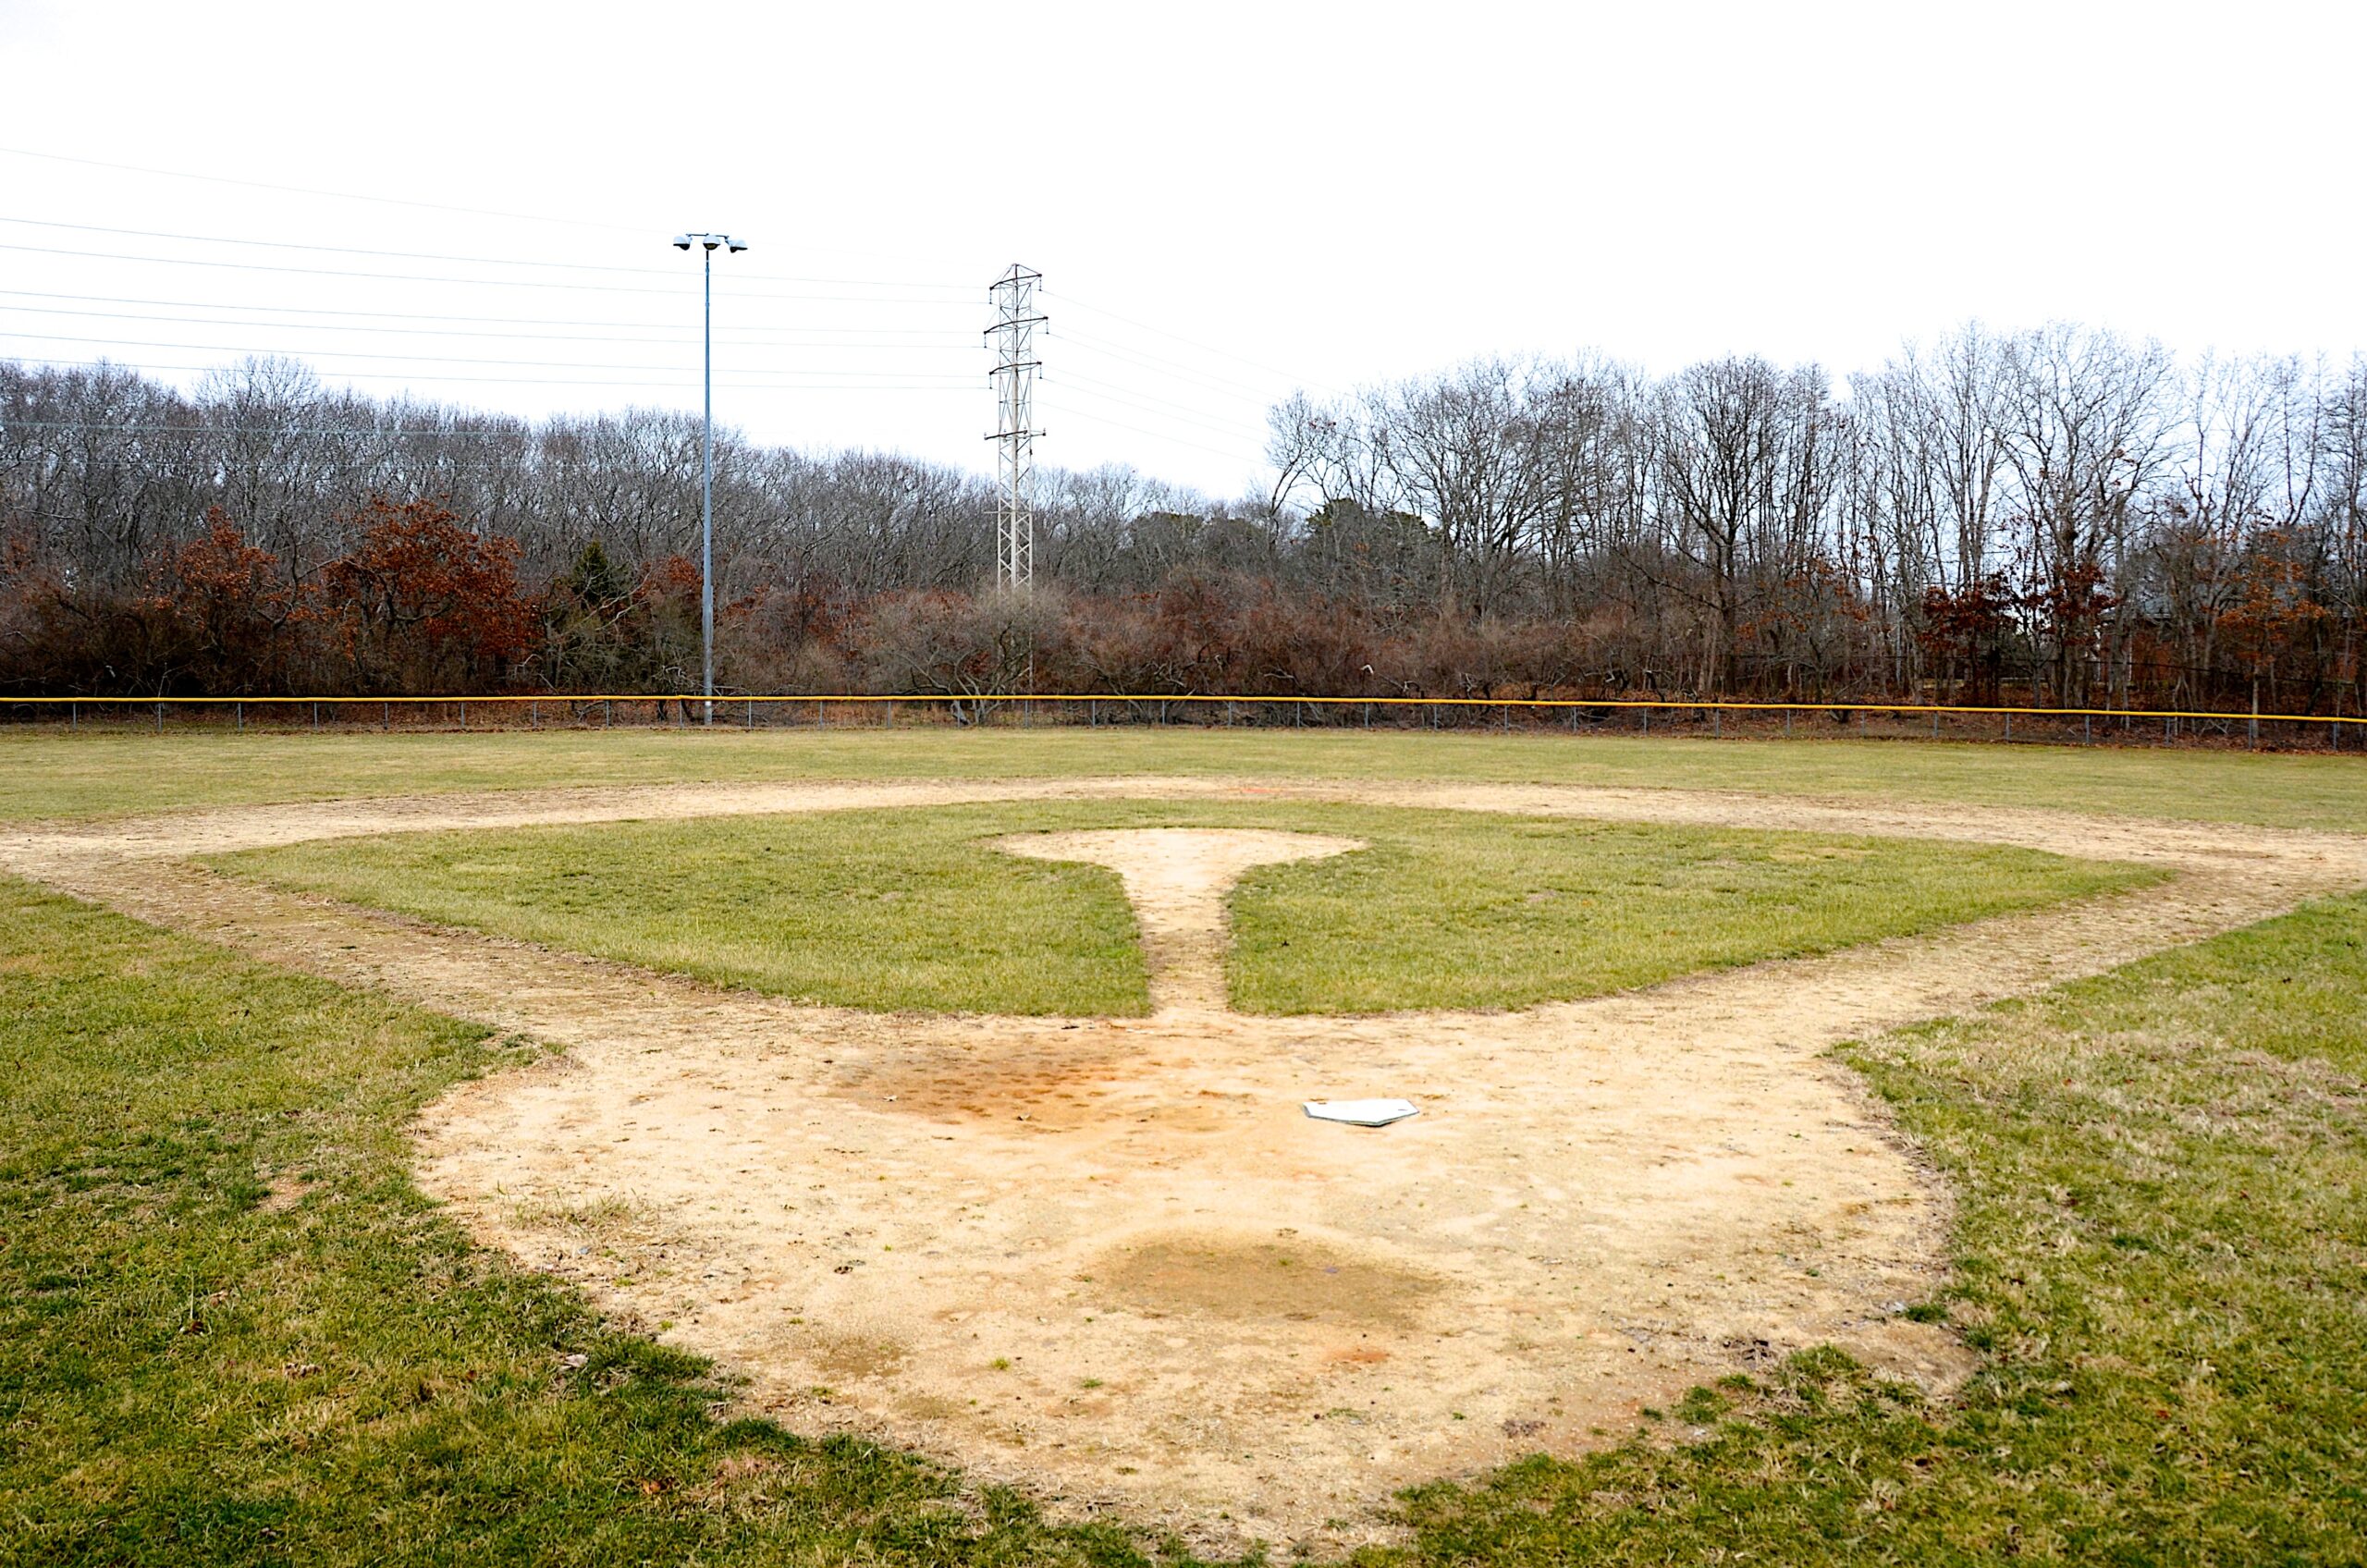 The now-abandoned ballfield on Pantigo Place where a groundbreaking for the new emergency facility was held eight months ago. Construction on the 22,000 square foot facility is finally due to begin this month.